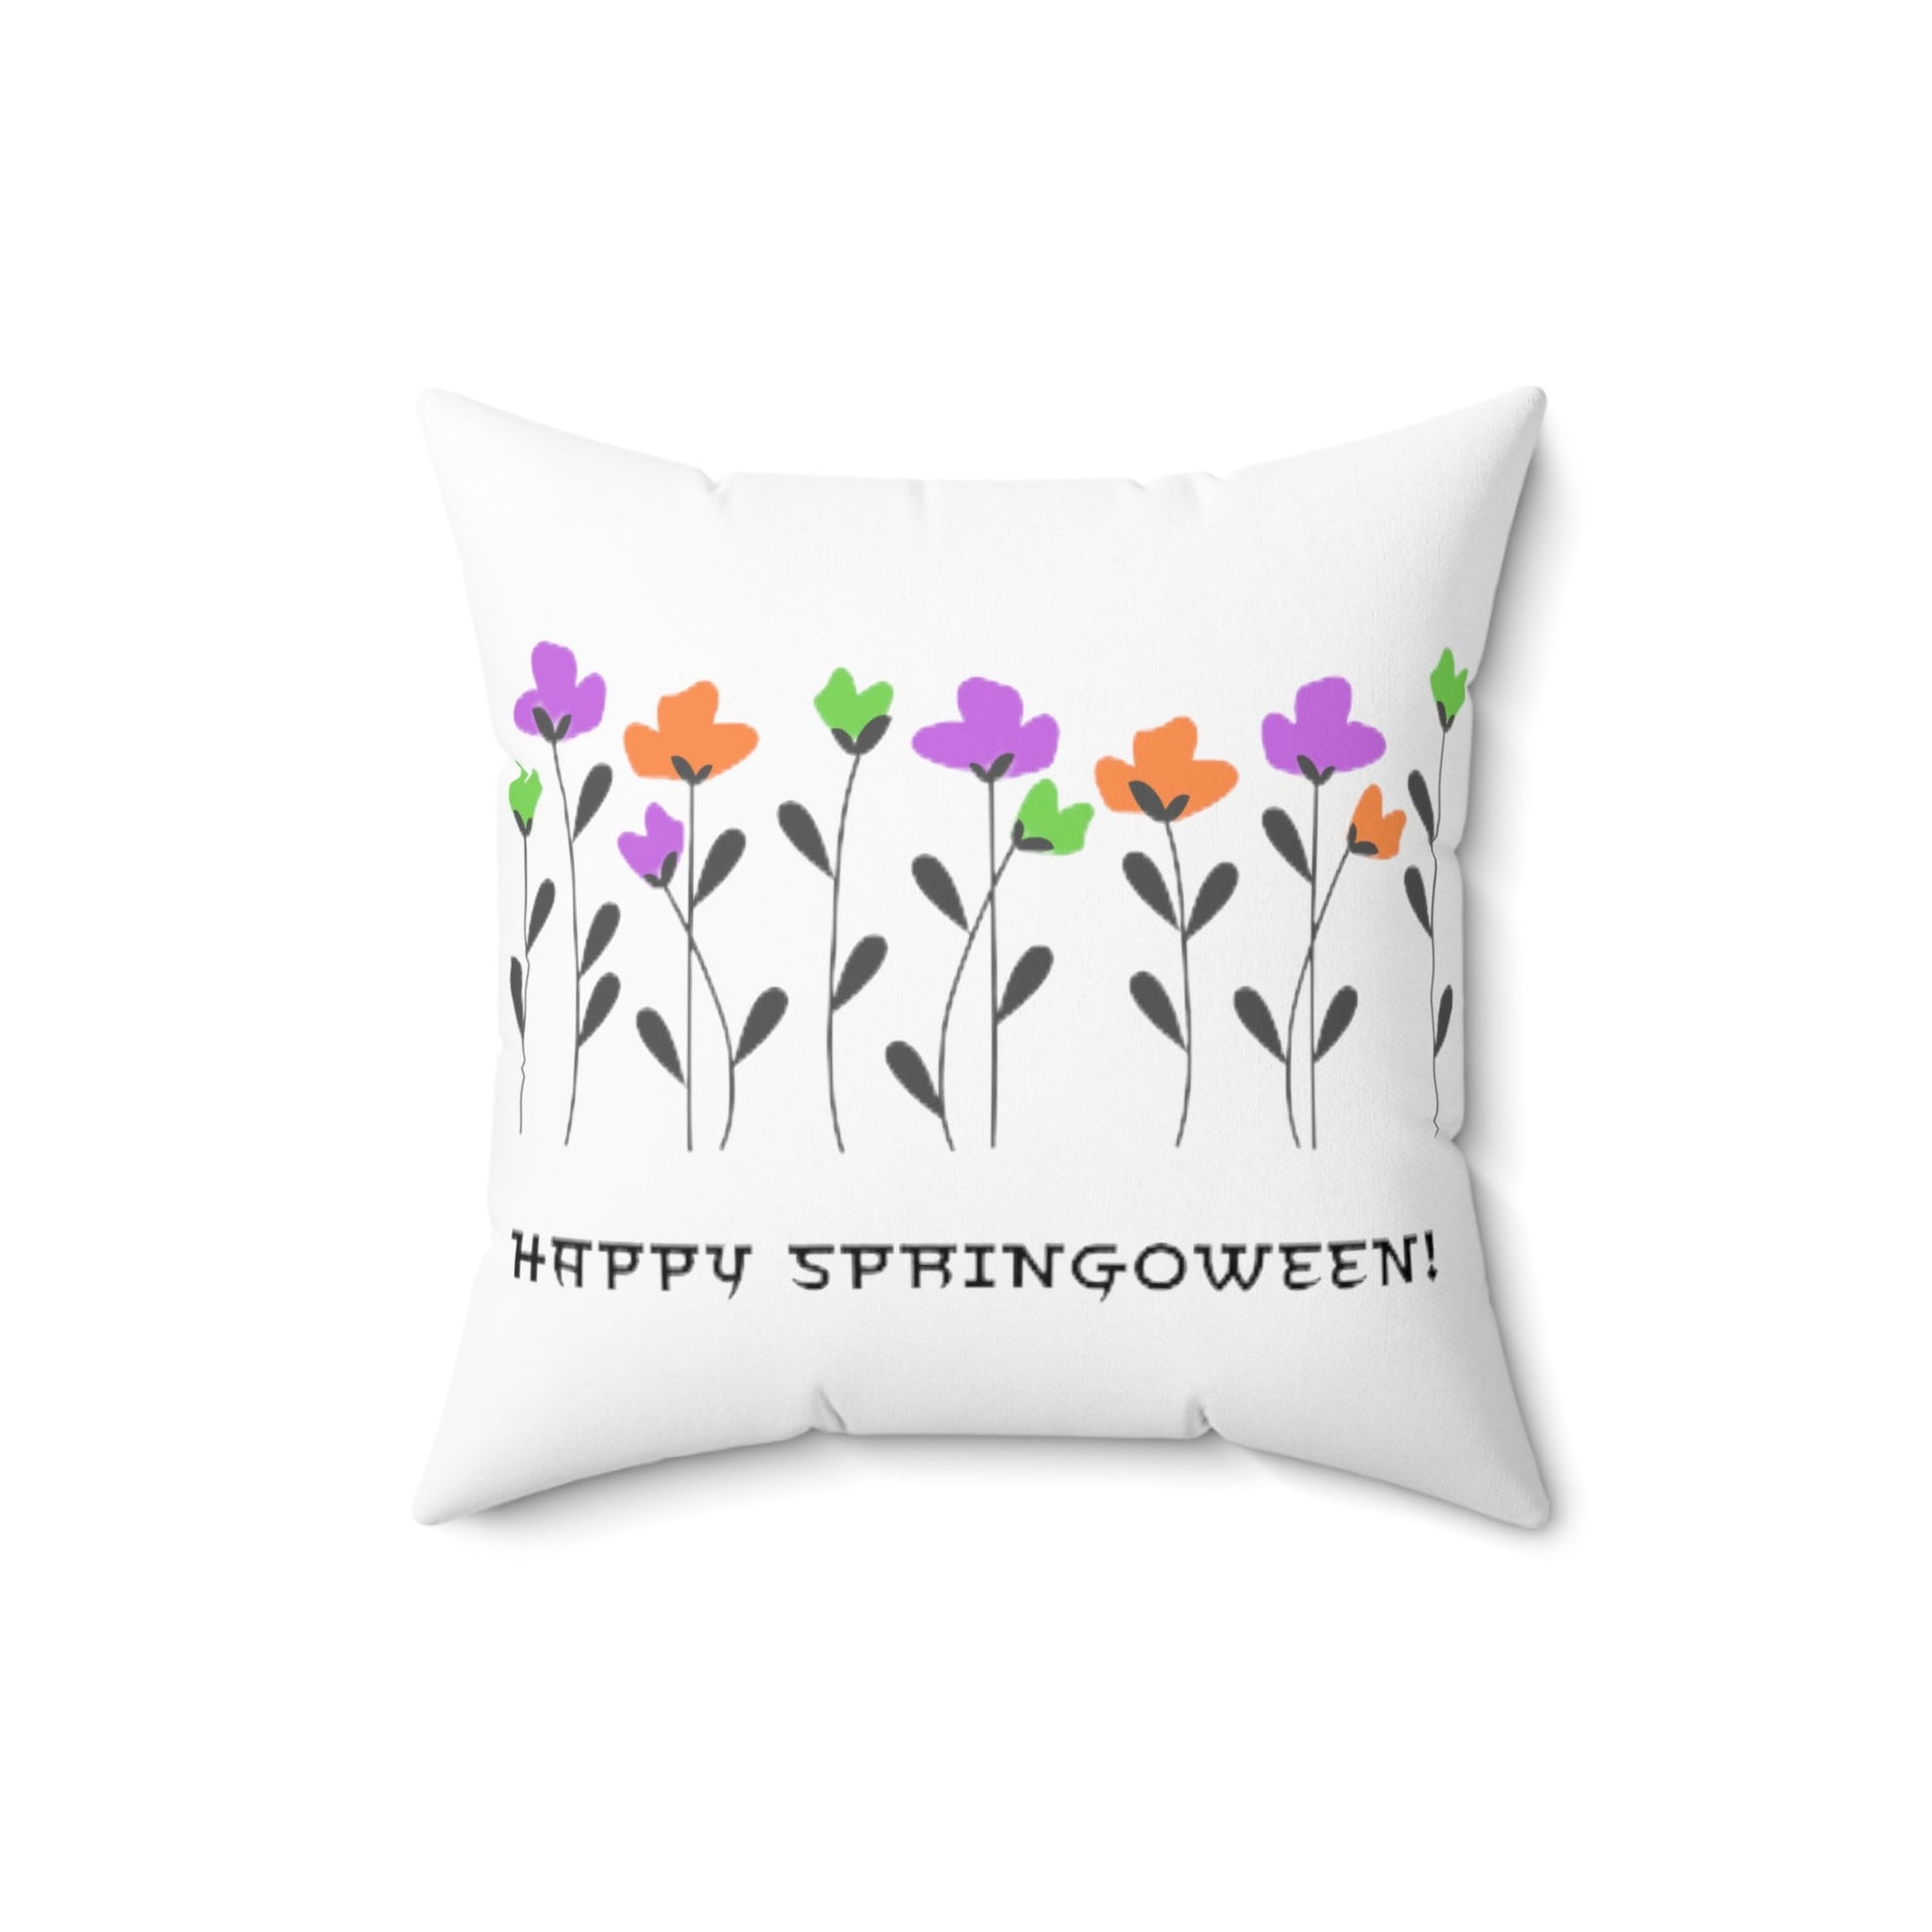 Happy Springoween Floral Spun Polyester Square Throw Pillow Halloween ColorsHome DecorVTZdesigns16" × 16"All Over PrintAOPBed